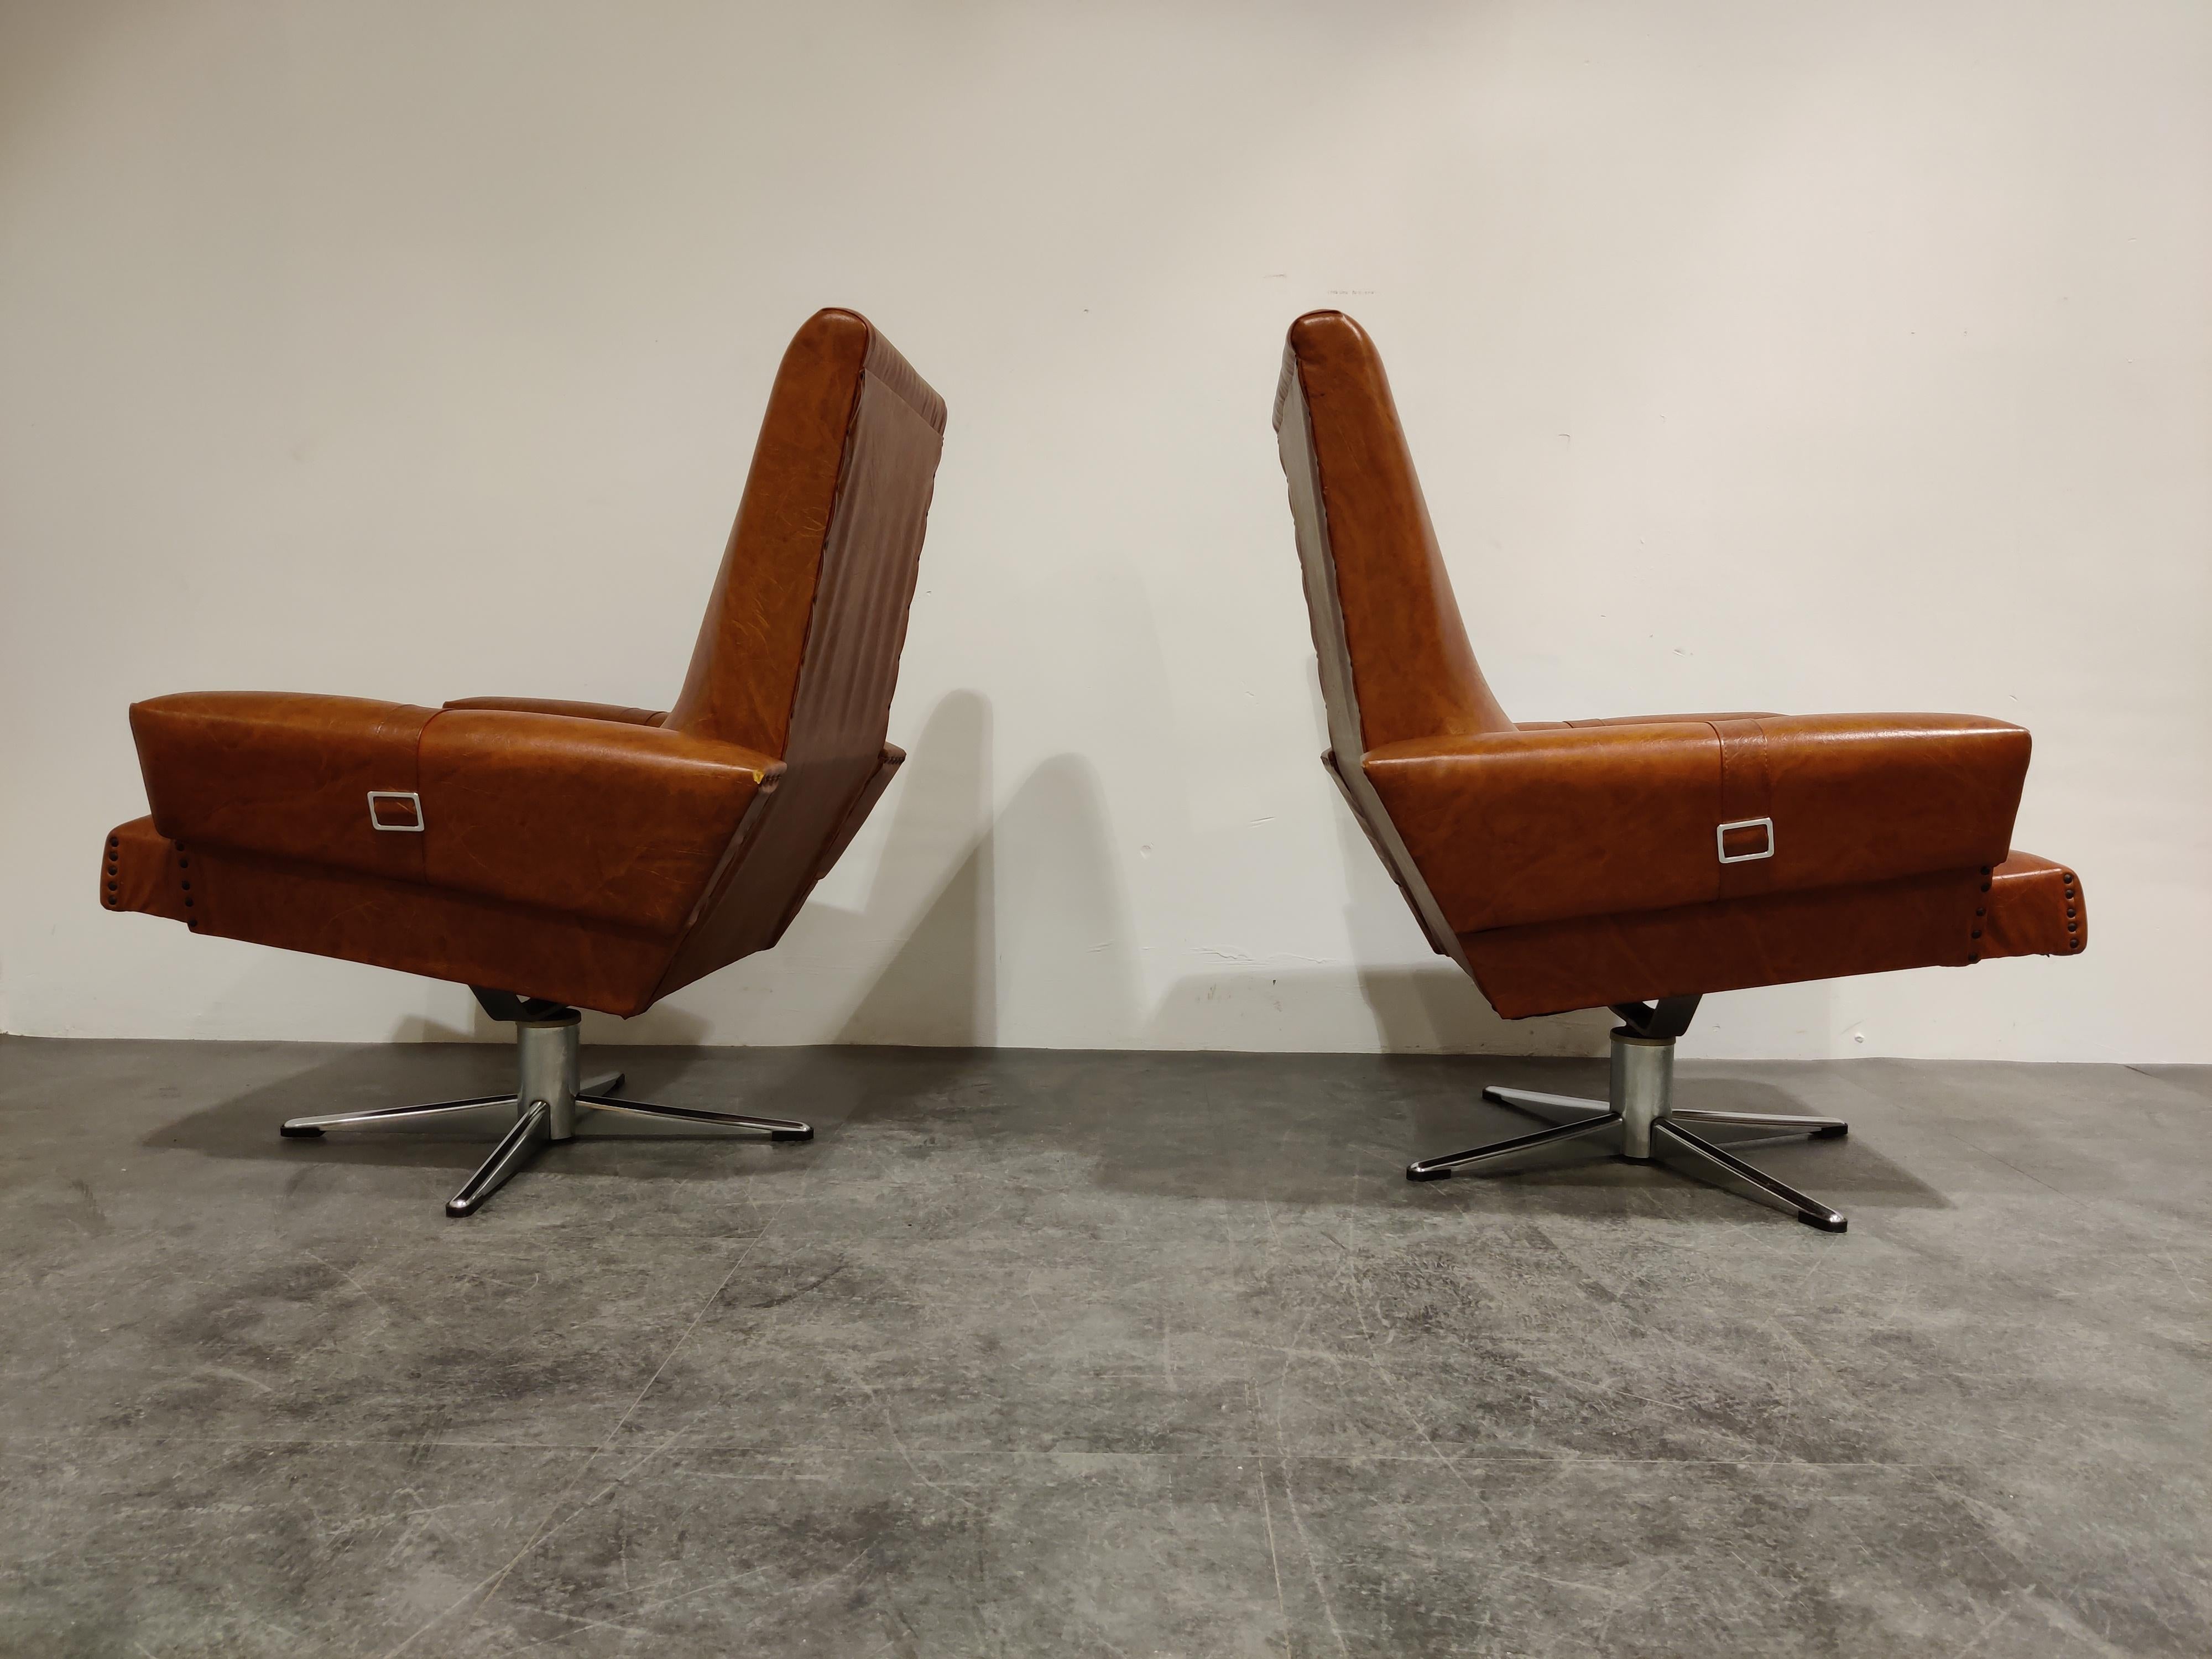 Pair of Belgian brown skai swivel chairs on a chrome base.

The chairs have a beautiful color and have their original upholster.

They are very comfortable.

Condition:
Corners at the back of the armrests have some damages
One chair has a